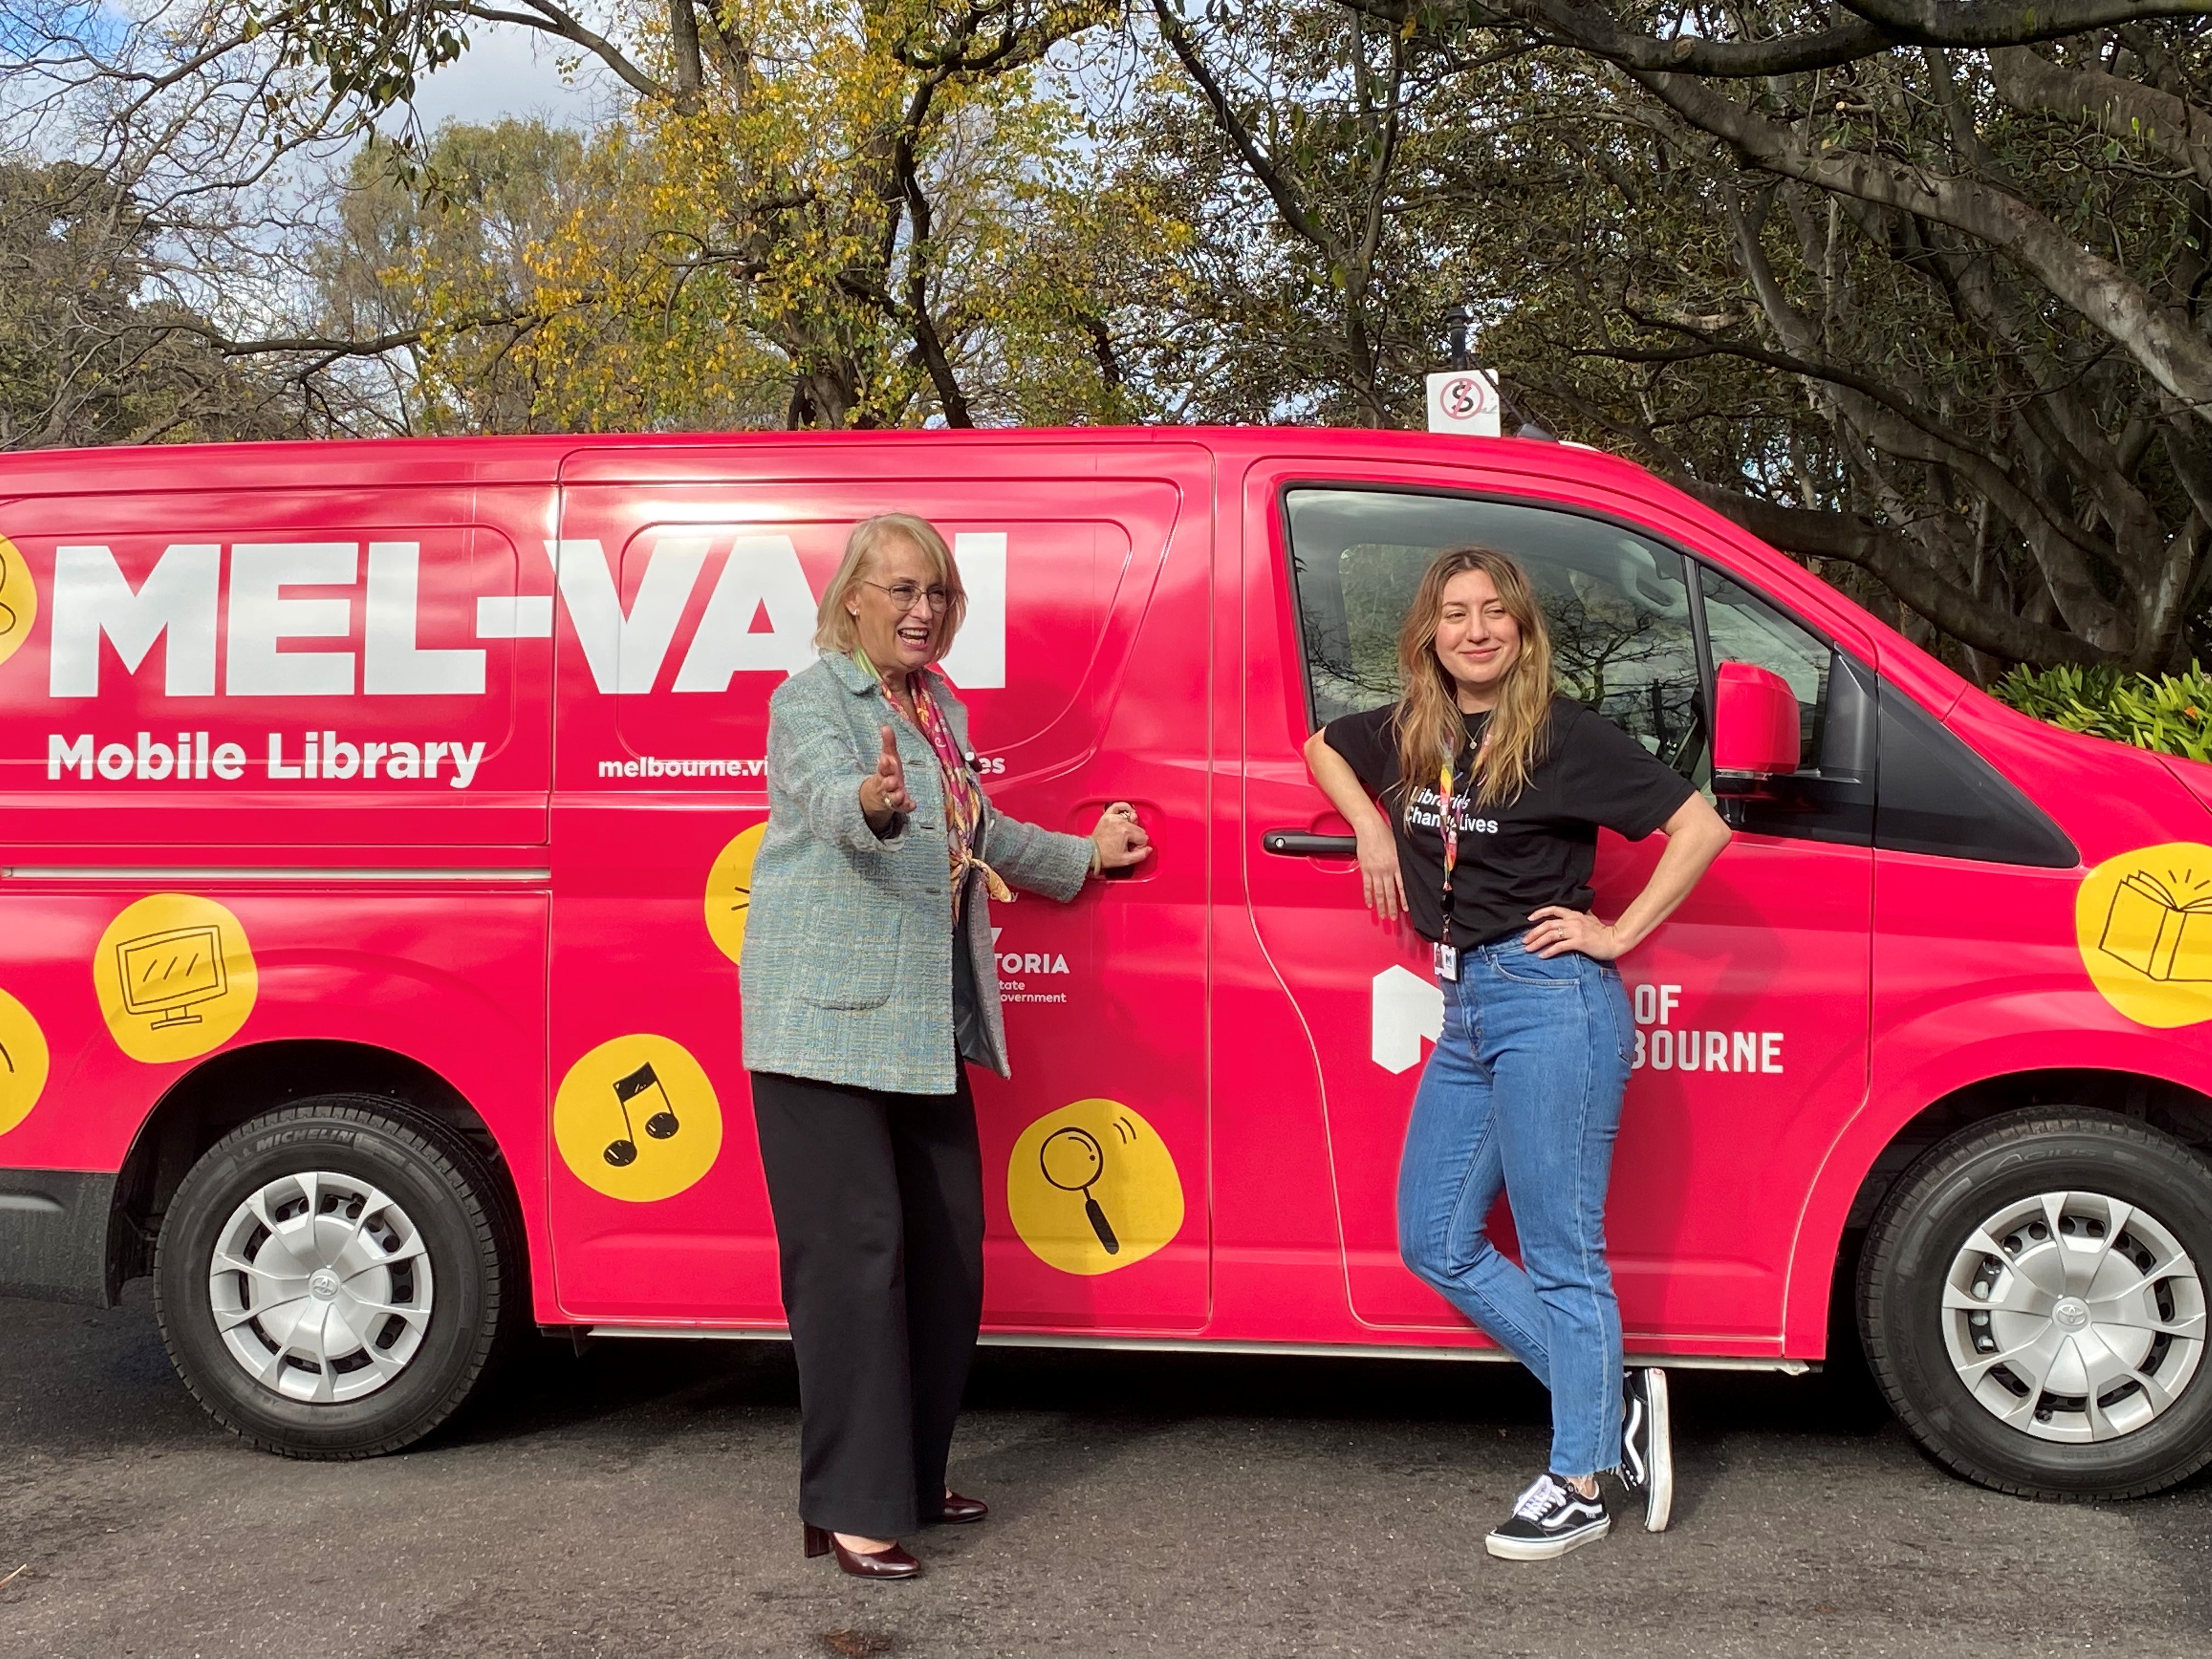 Lord Mayor Sally Capp and a librarian with the city of melbourne libraries mel-van